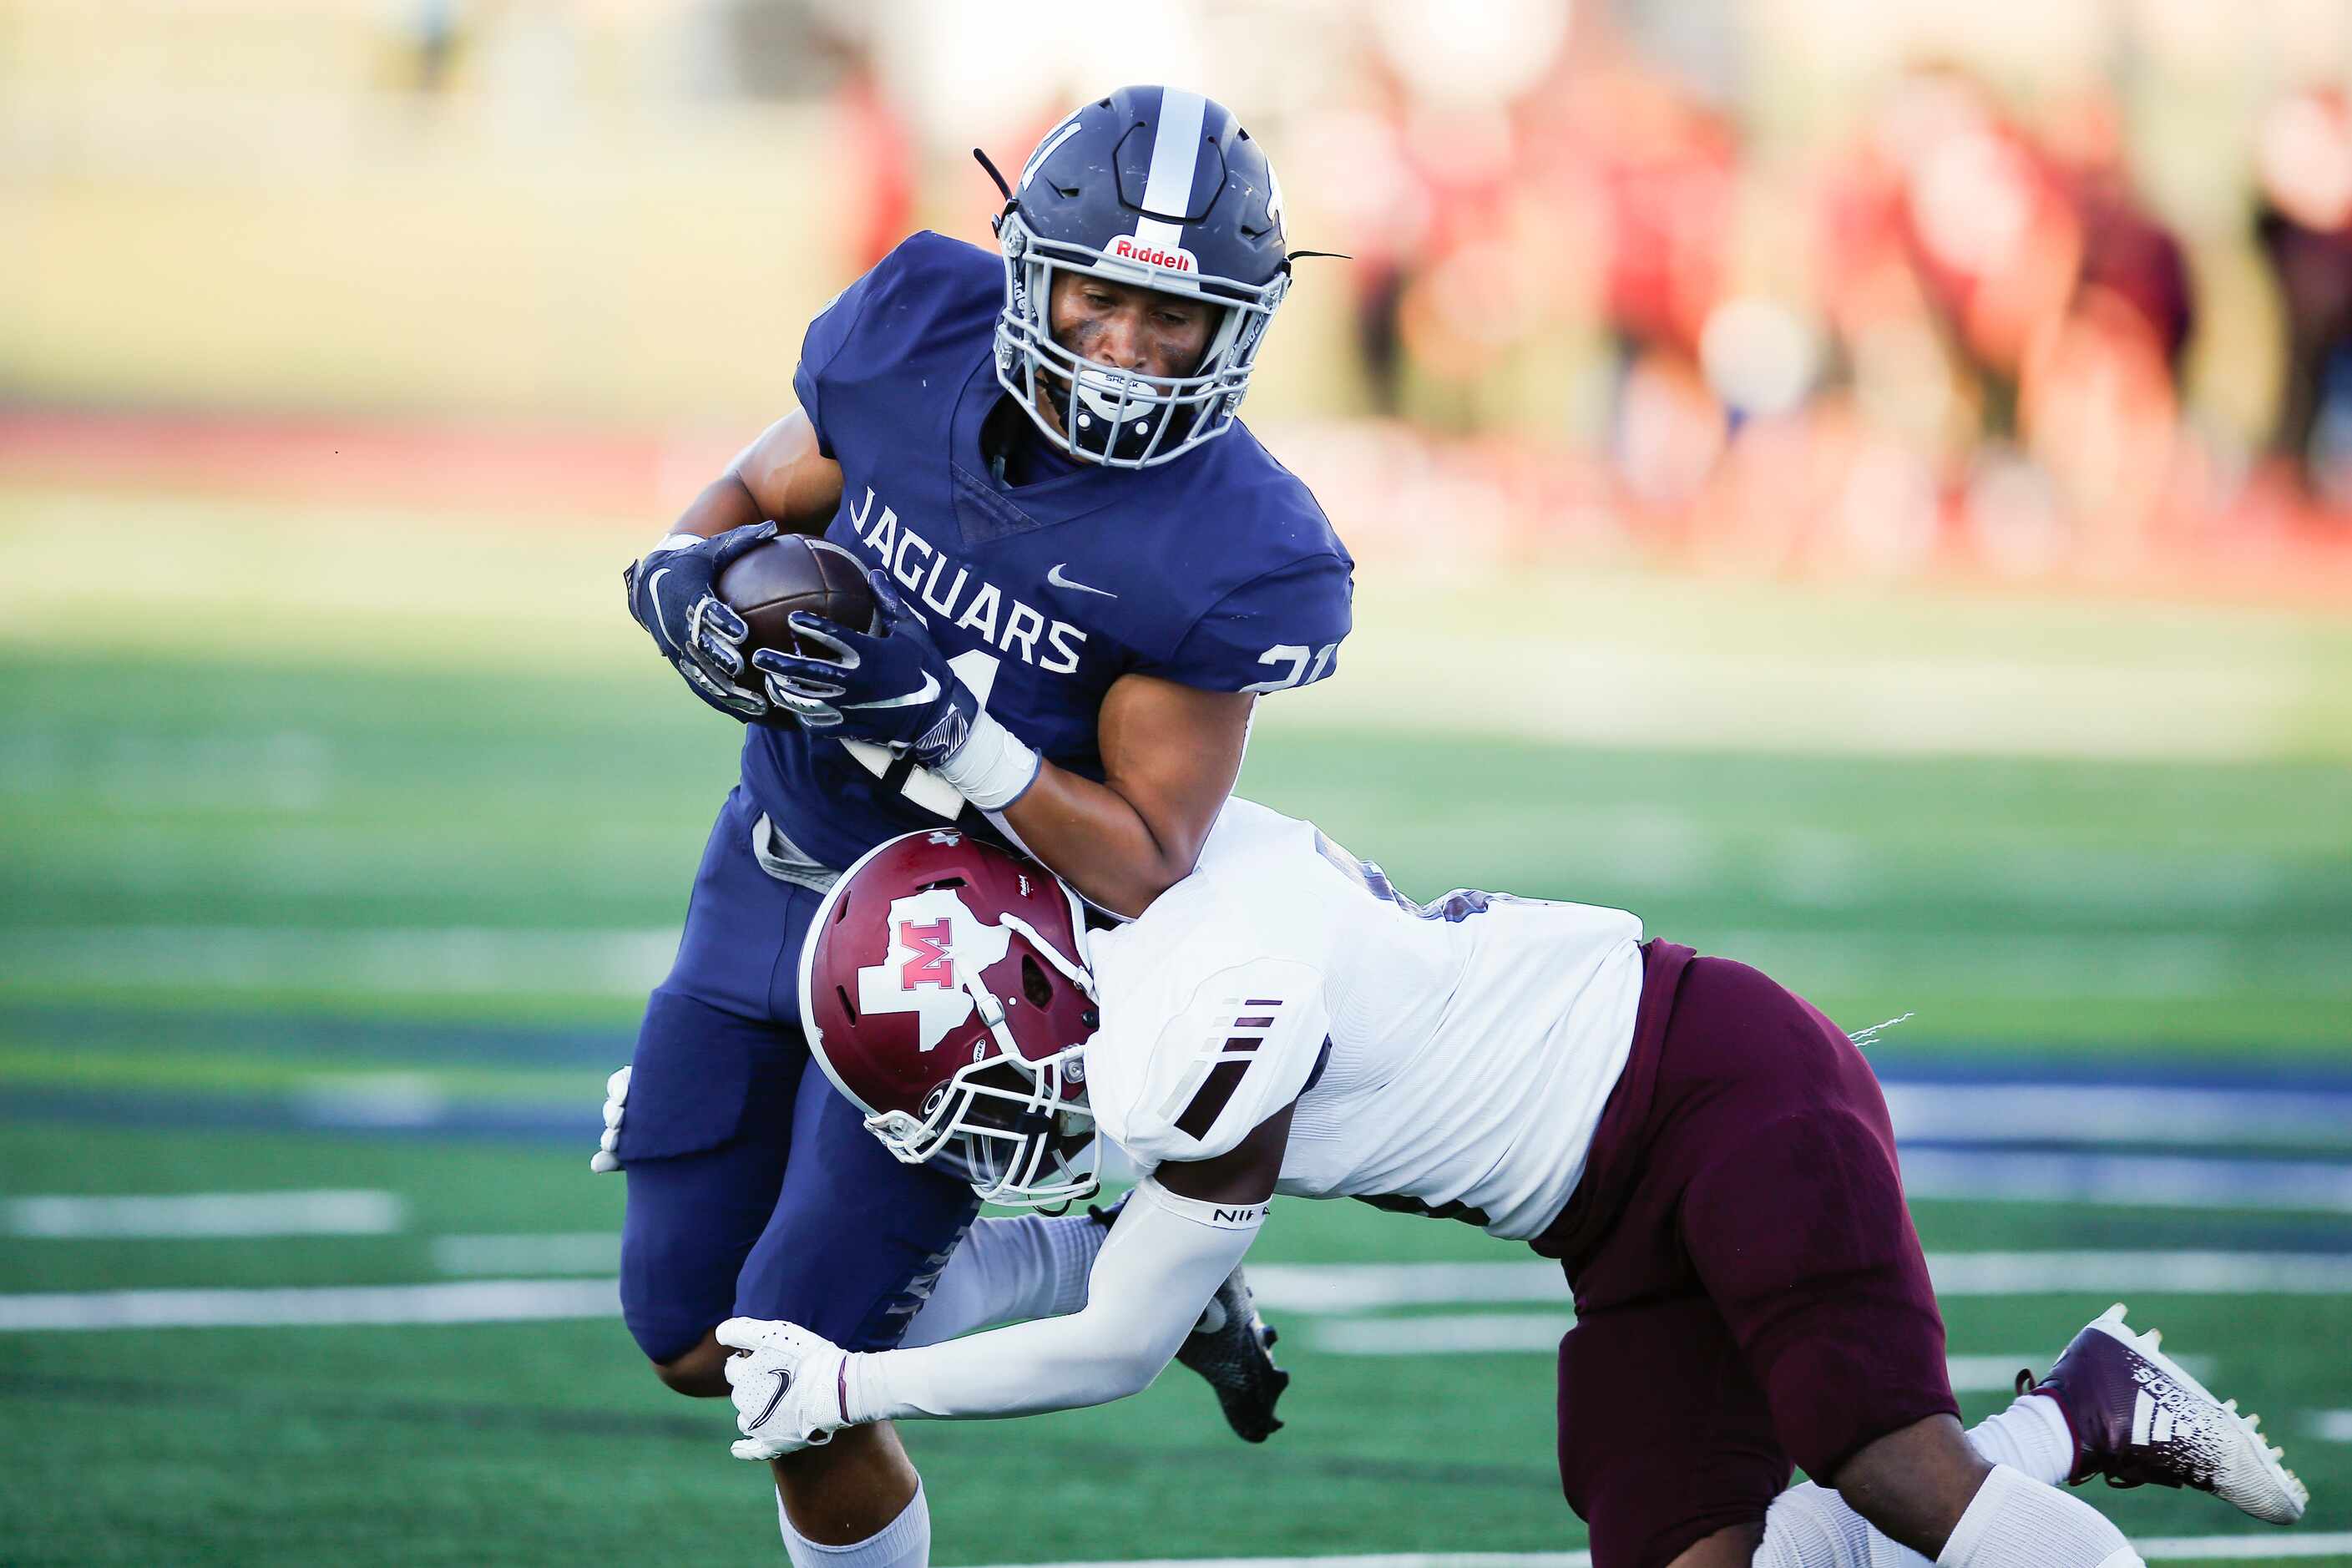 Flower Mound senior running back Max Ritchie (21) carries the ball as Mesquite senior...